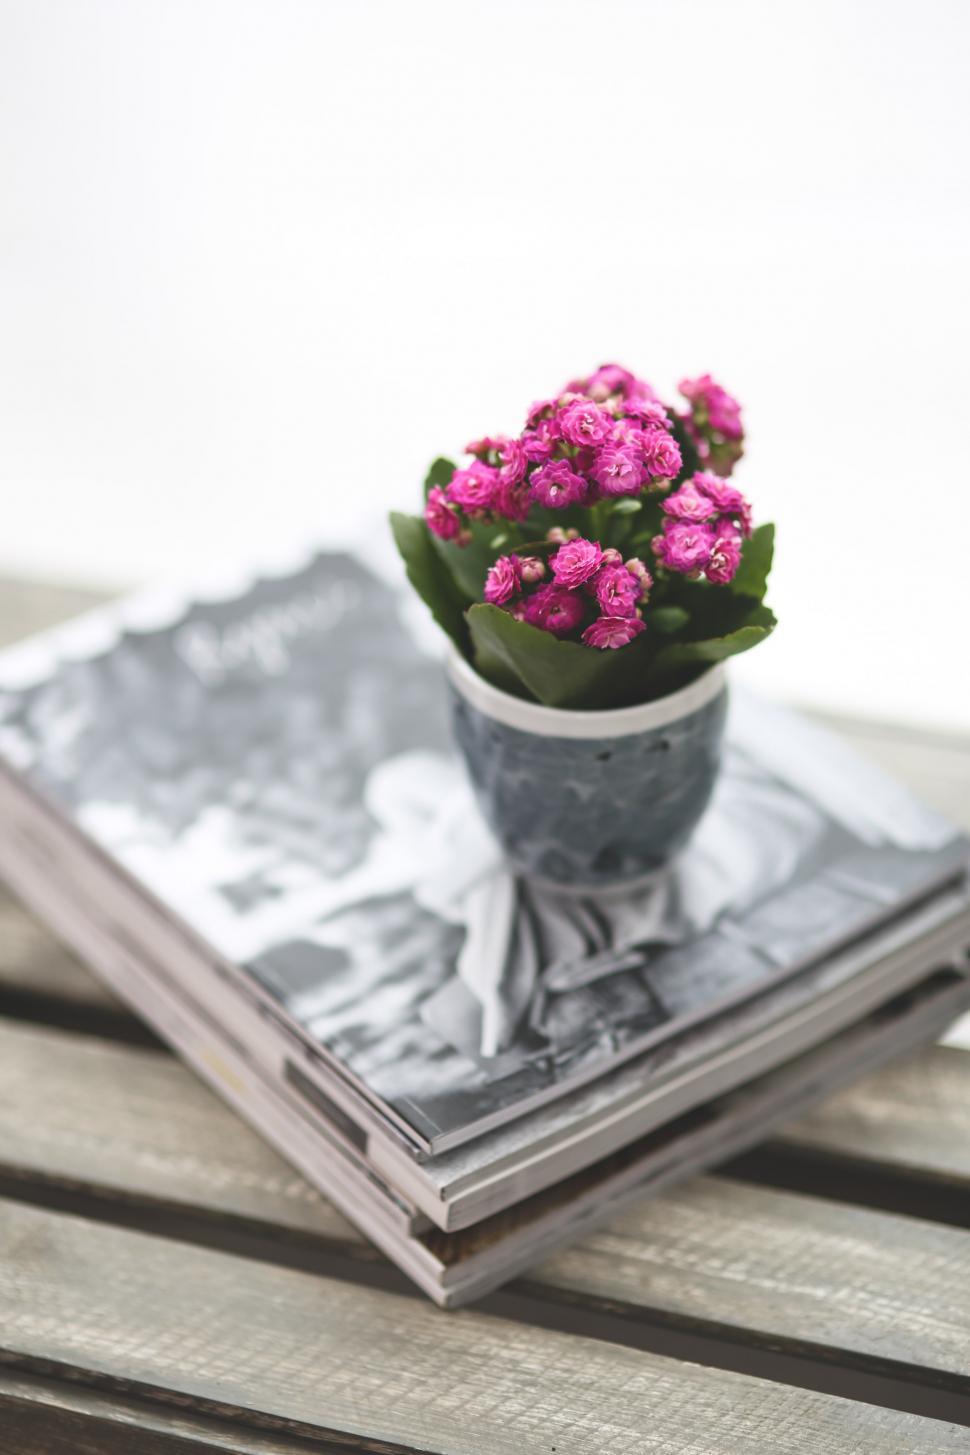 Free Image of Small Potted Plant on Magazine 